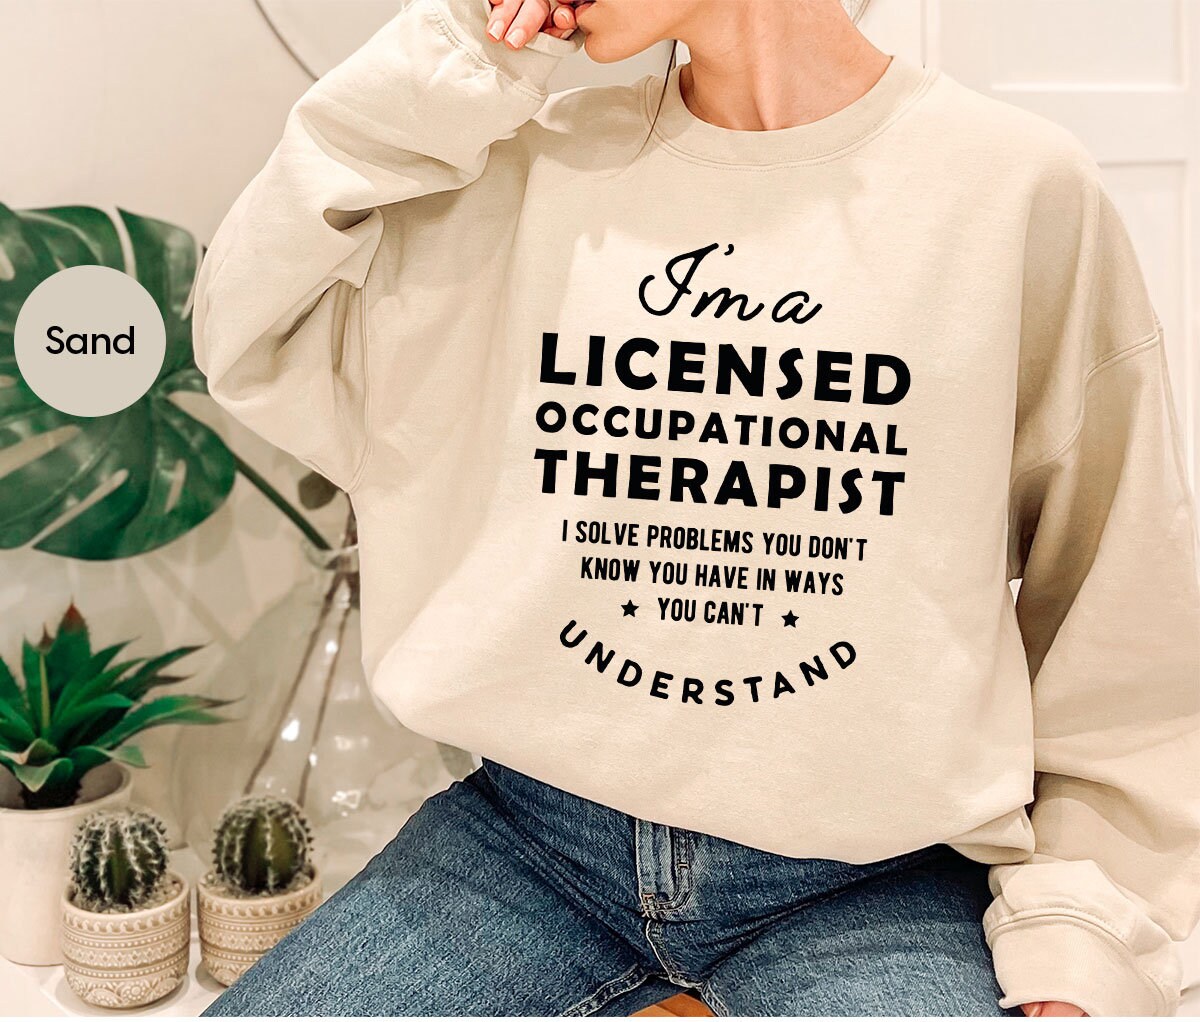 Discover Occupational Therapy Outfit, Motivational Shirt, Therapist Sweatshirt, Occupational Therapist T-Shirt, Gift for Therapist, Occupational Tees